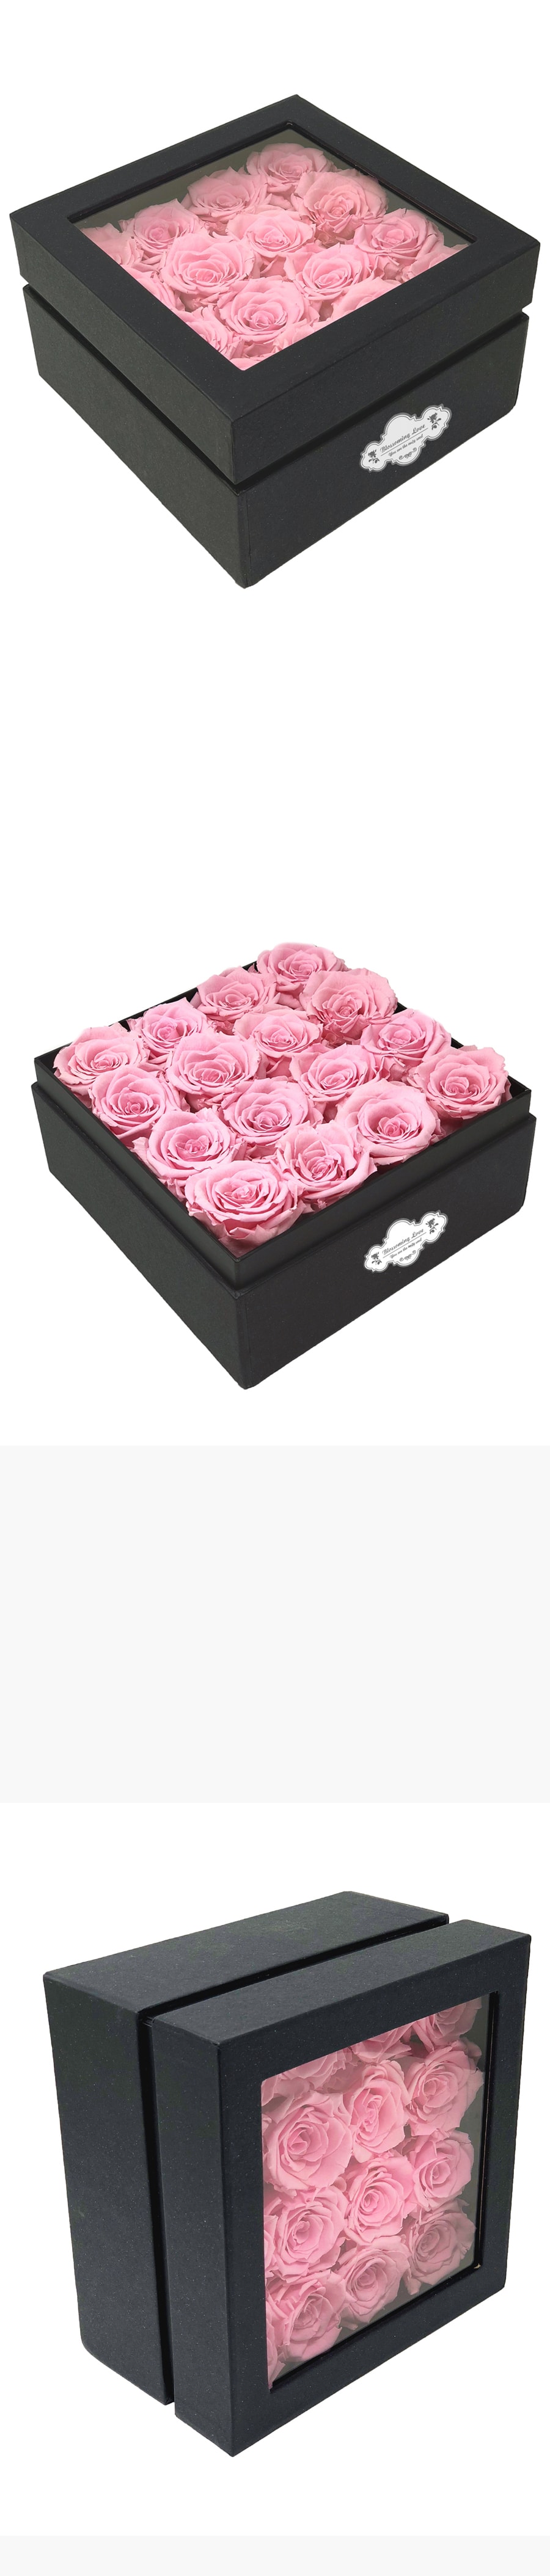 SEE-THROUGH SQUARE BOX - PINK ROSES